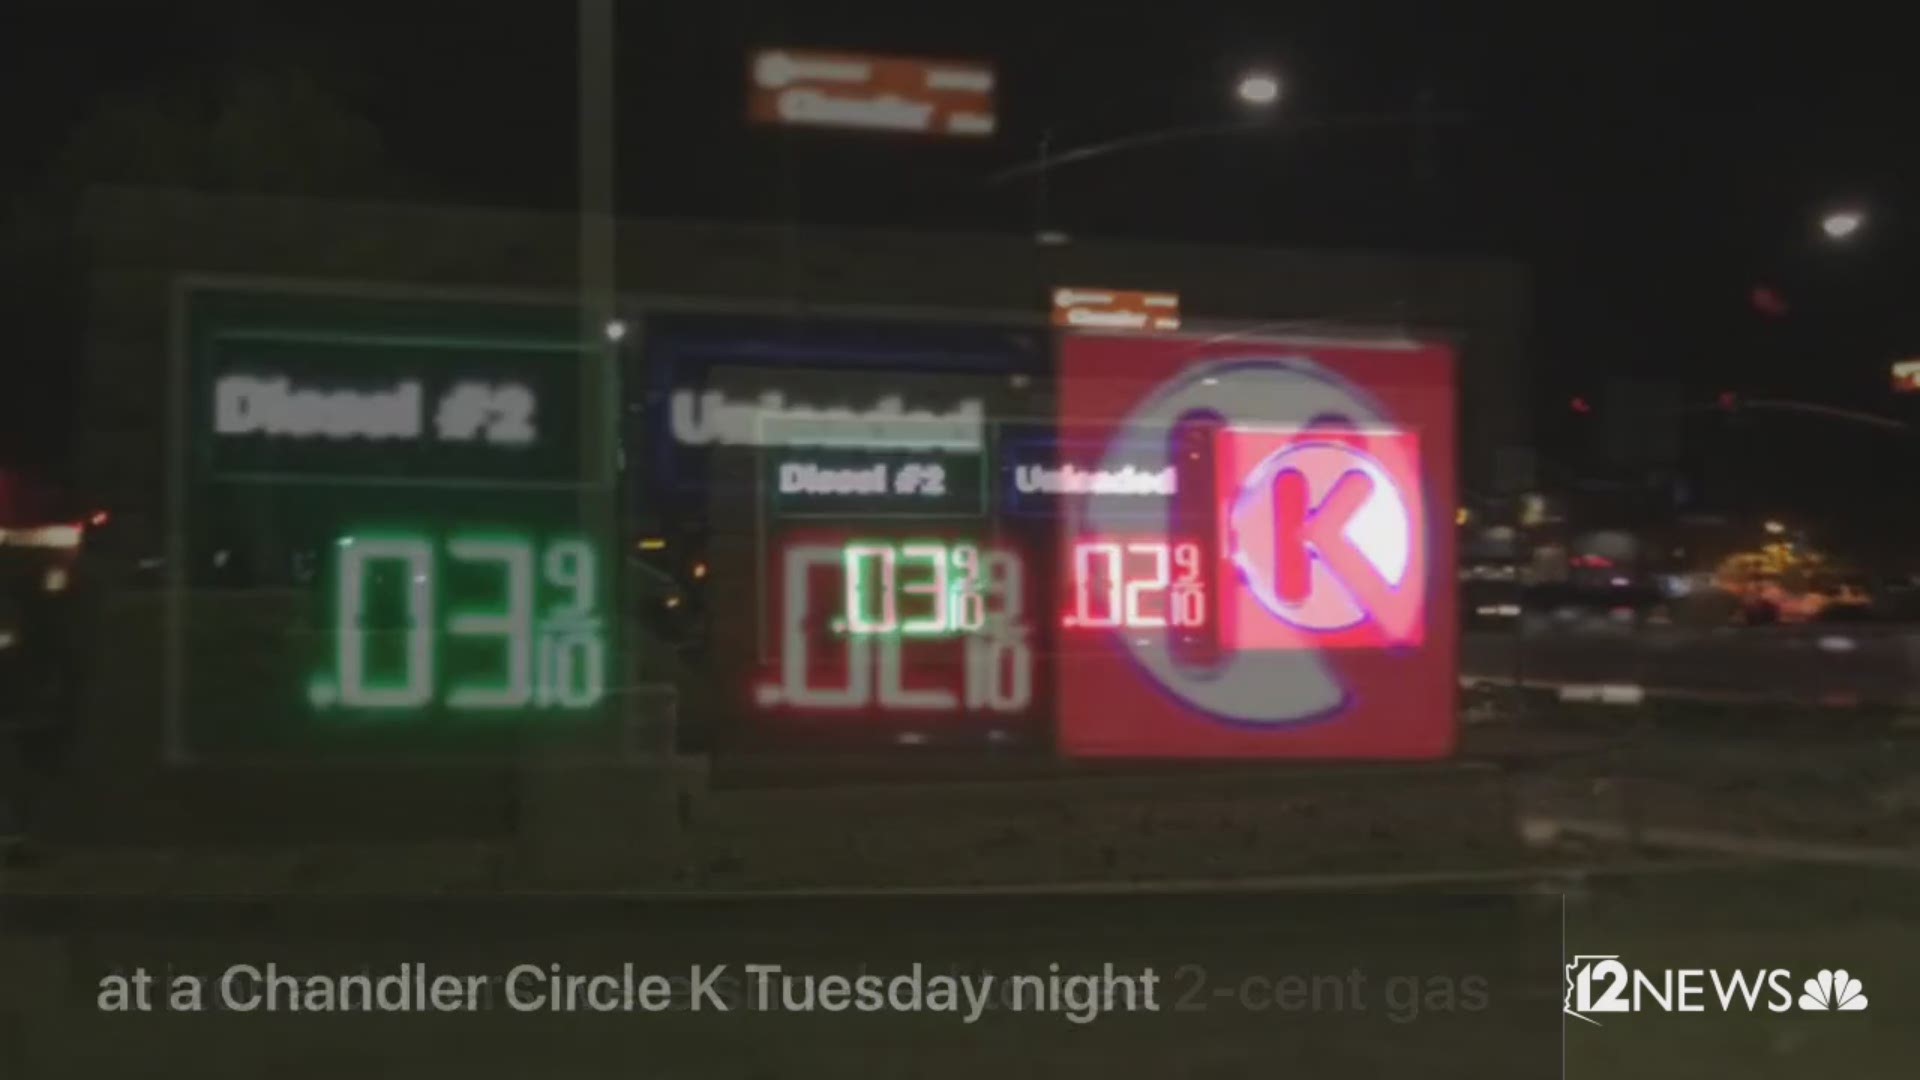 Drivers were shocked to see gas for 2 cents a gallon at a Chandler gas station Tuesday night.